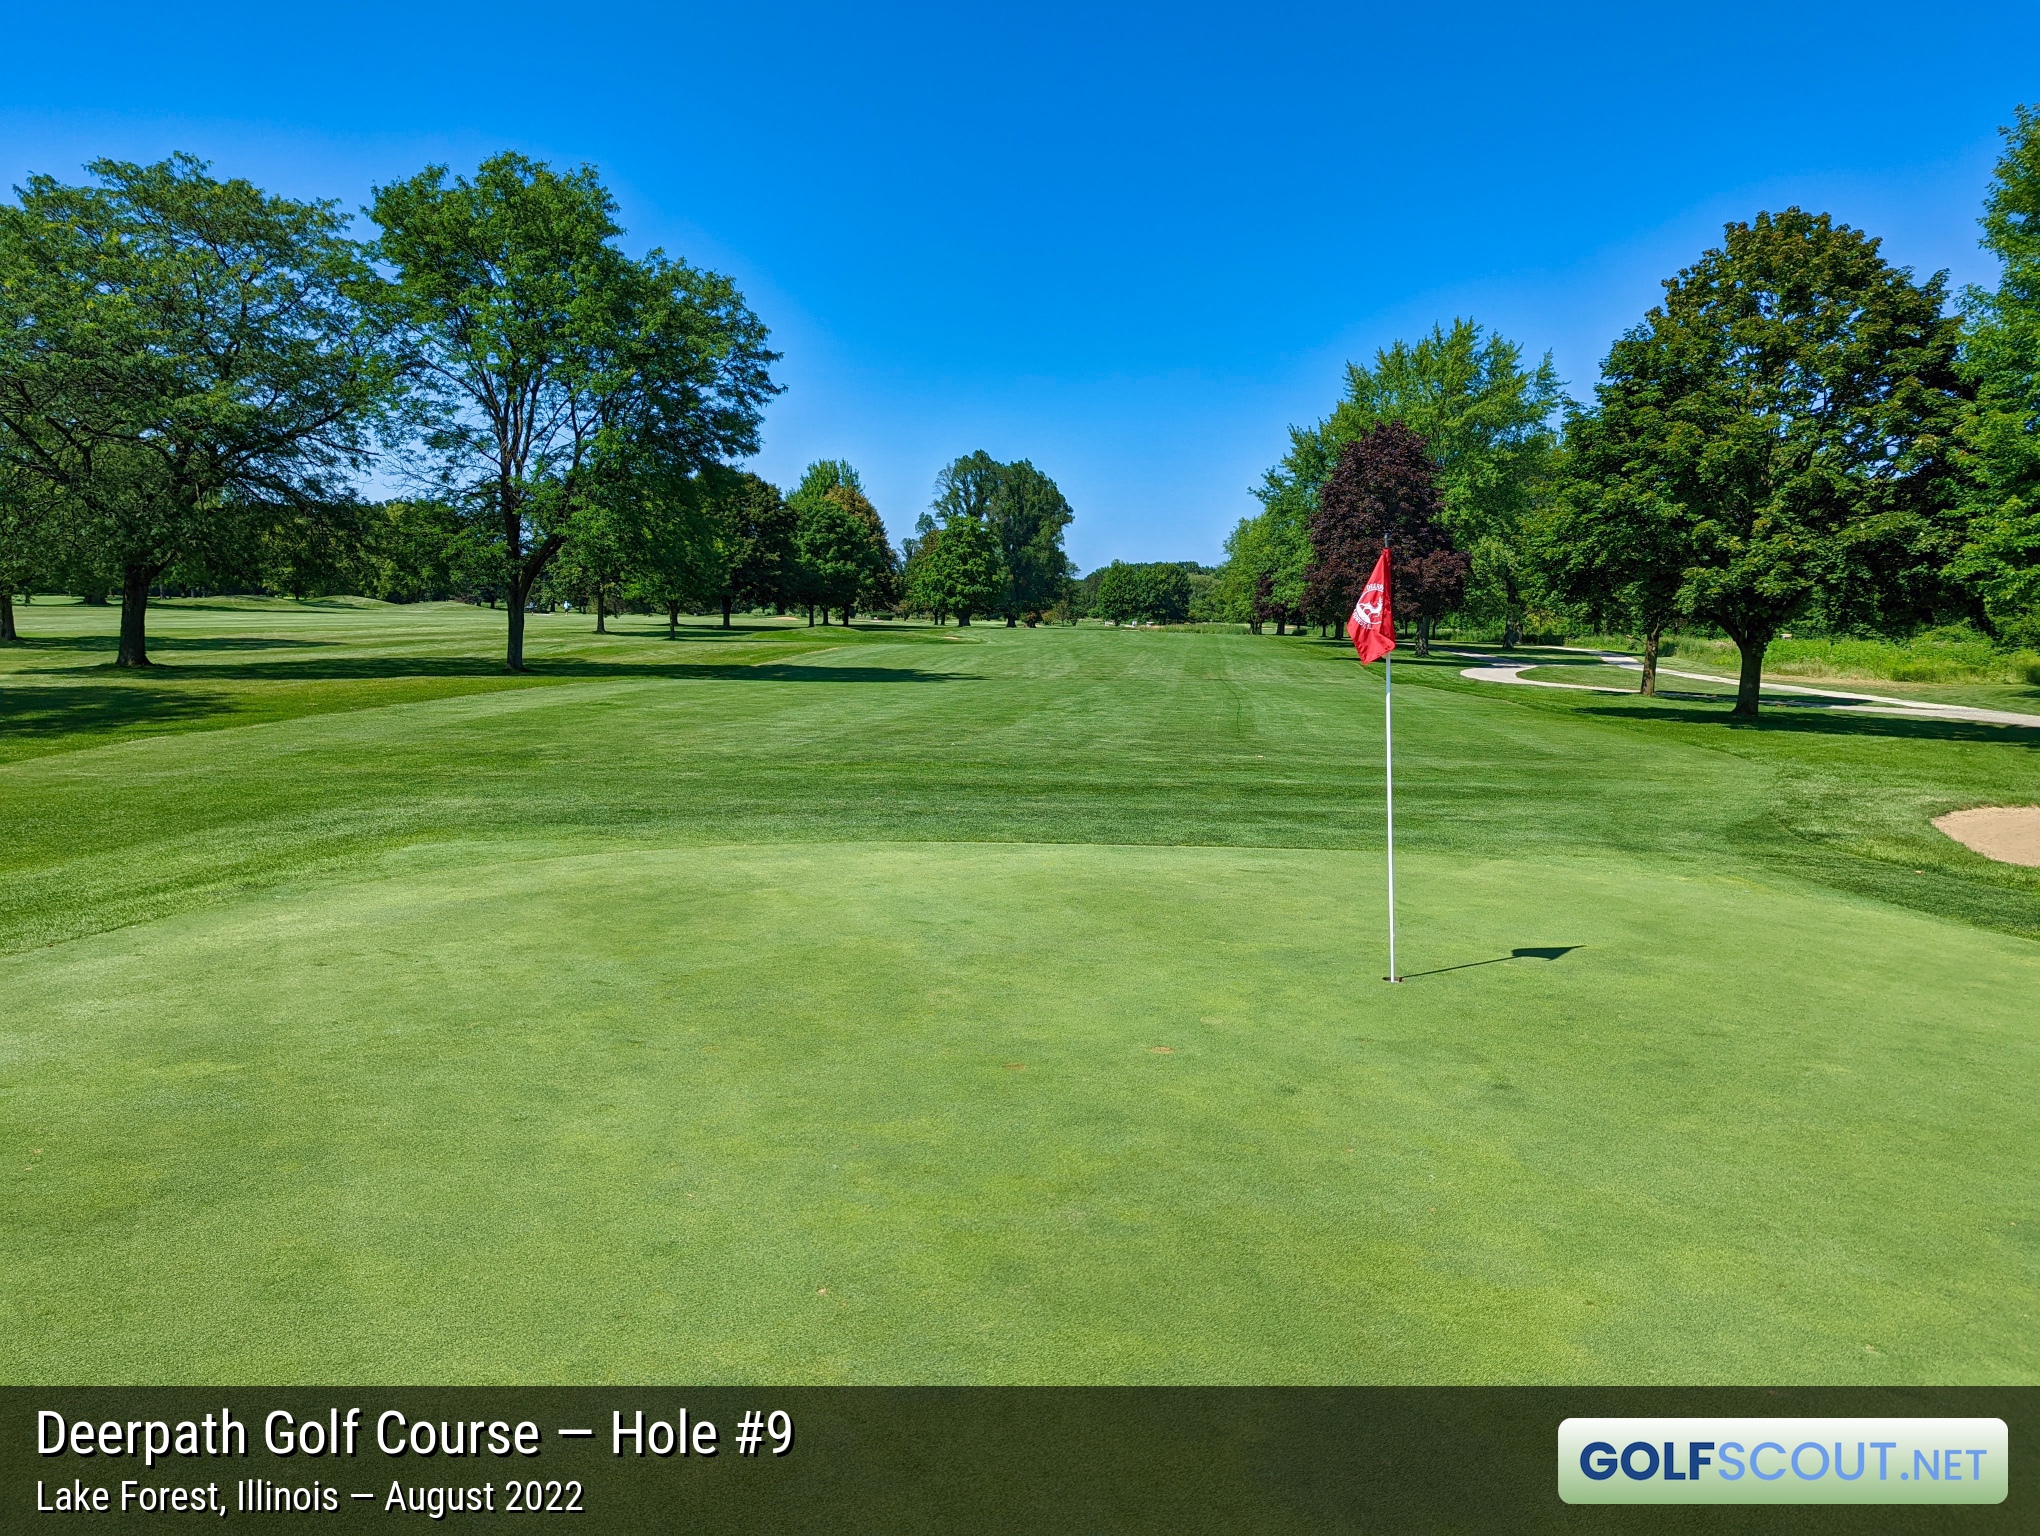 Photo of hole #9 at Deerpath Golf Course in Lake Forest, Illinois. 